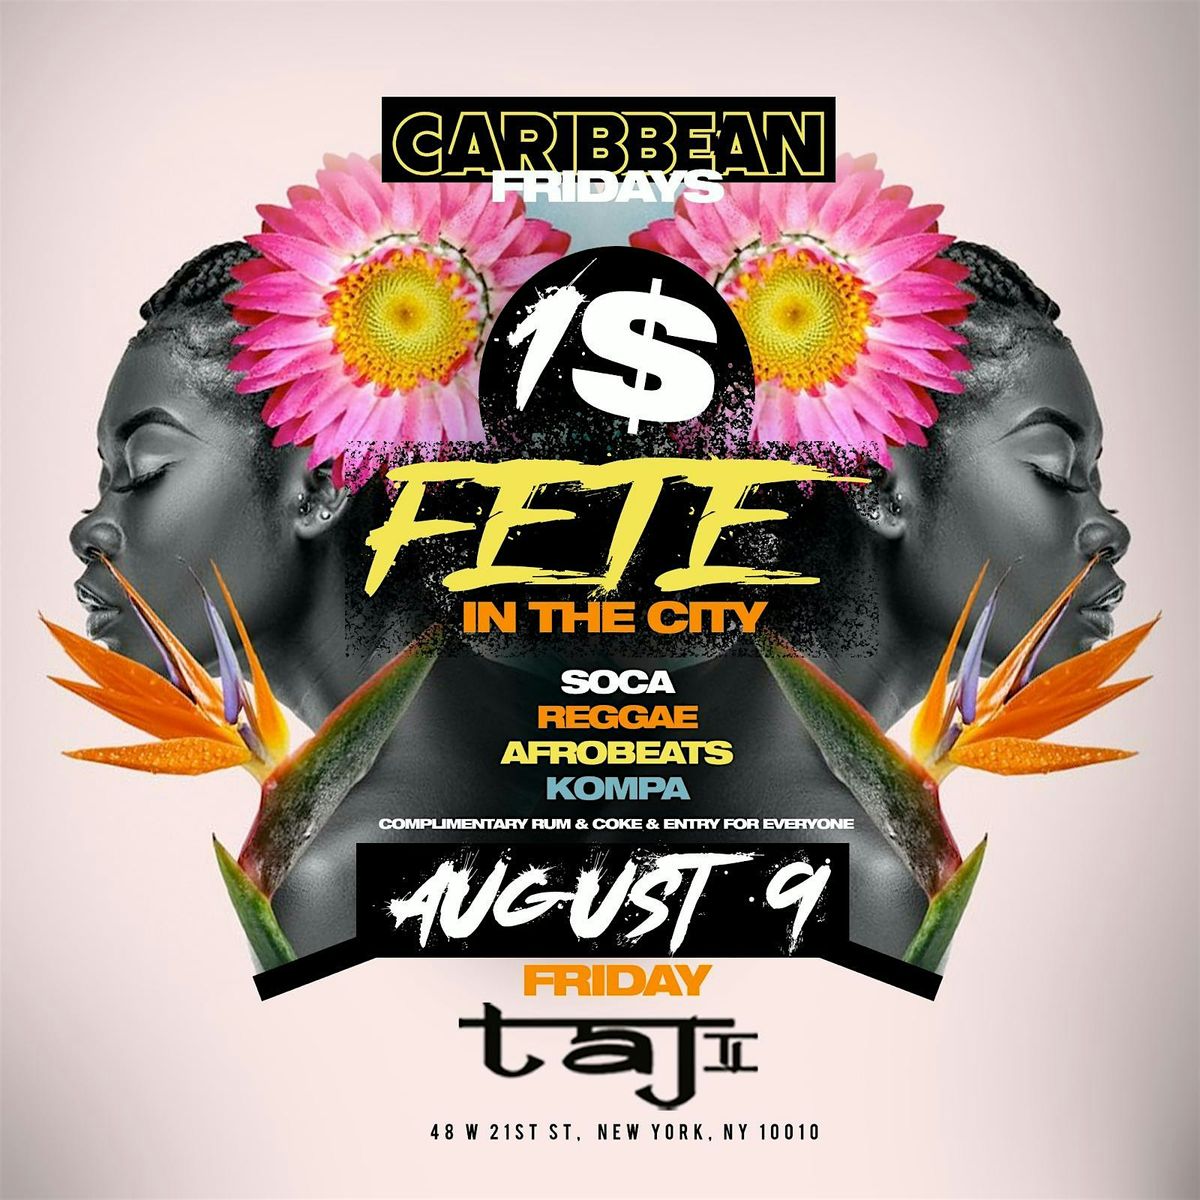 Caribbean Fridays $1 Fete In The City  @  Taj: Free entry with RSVP